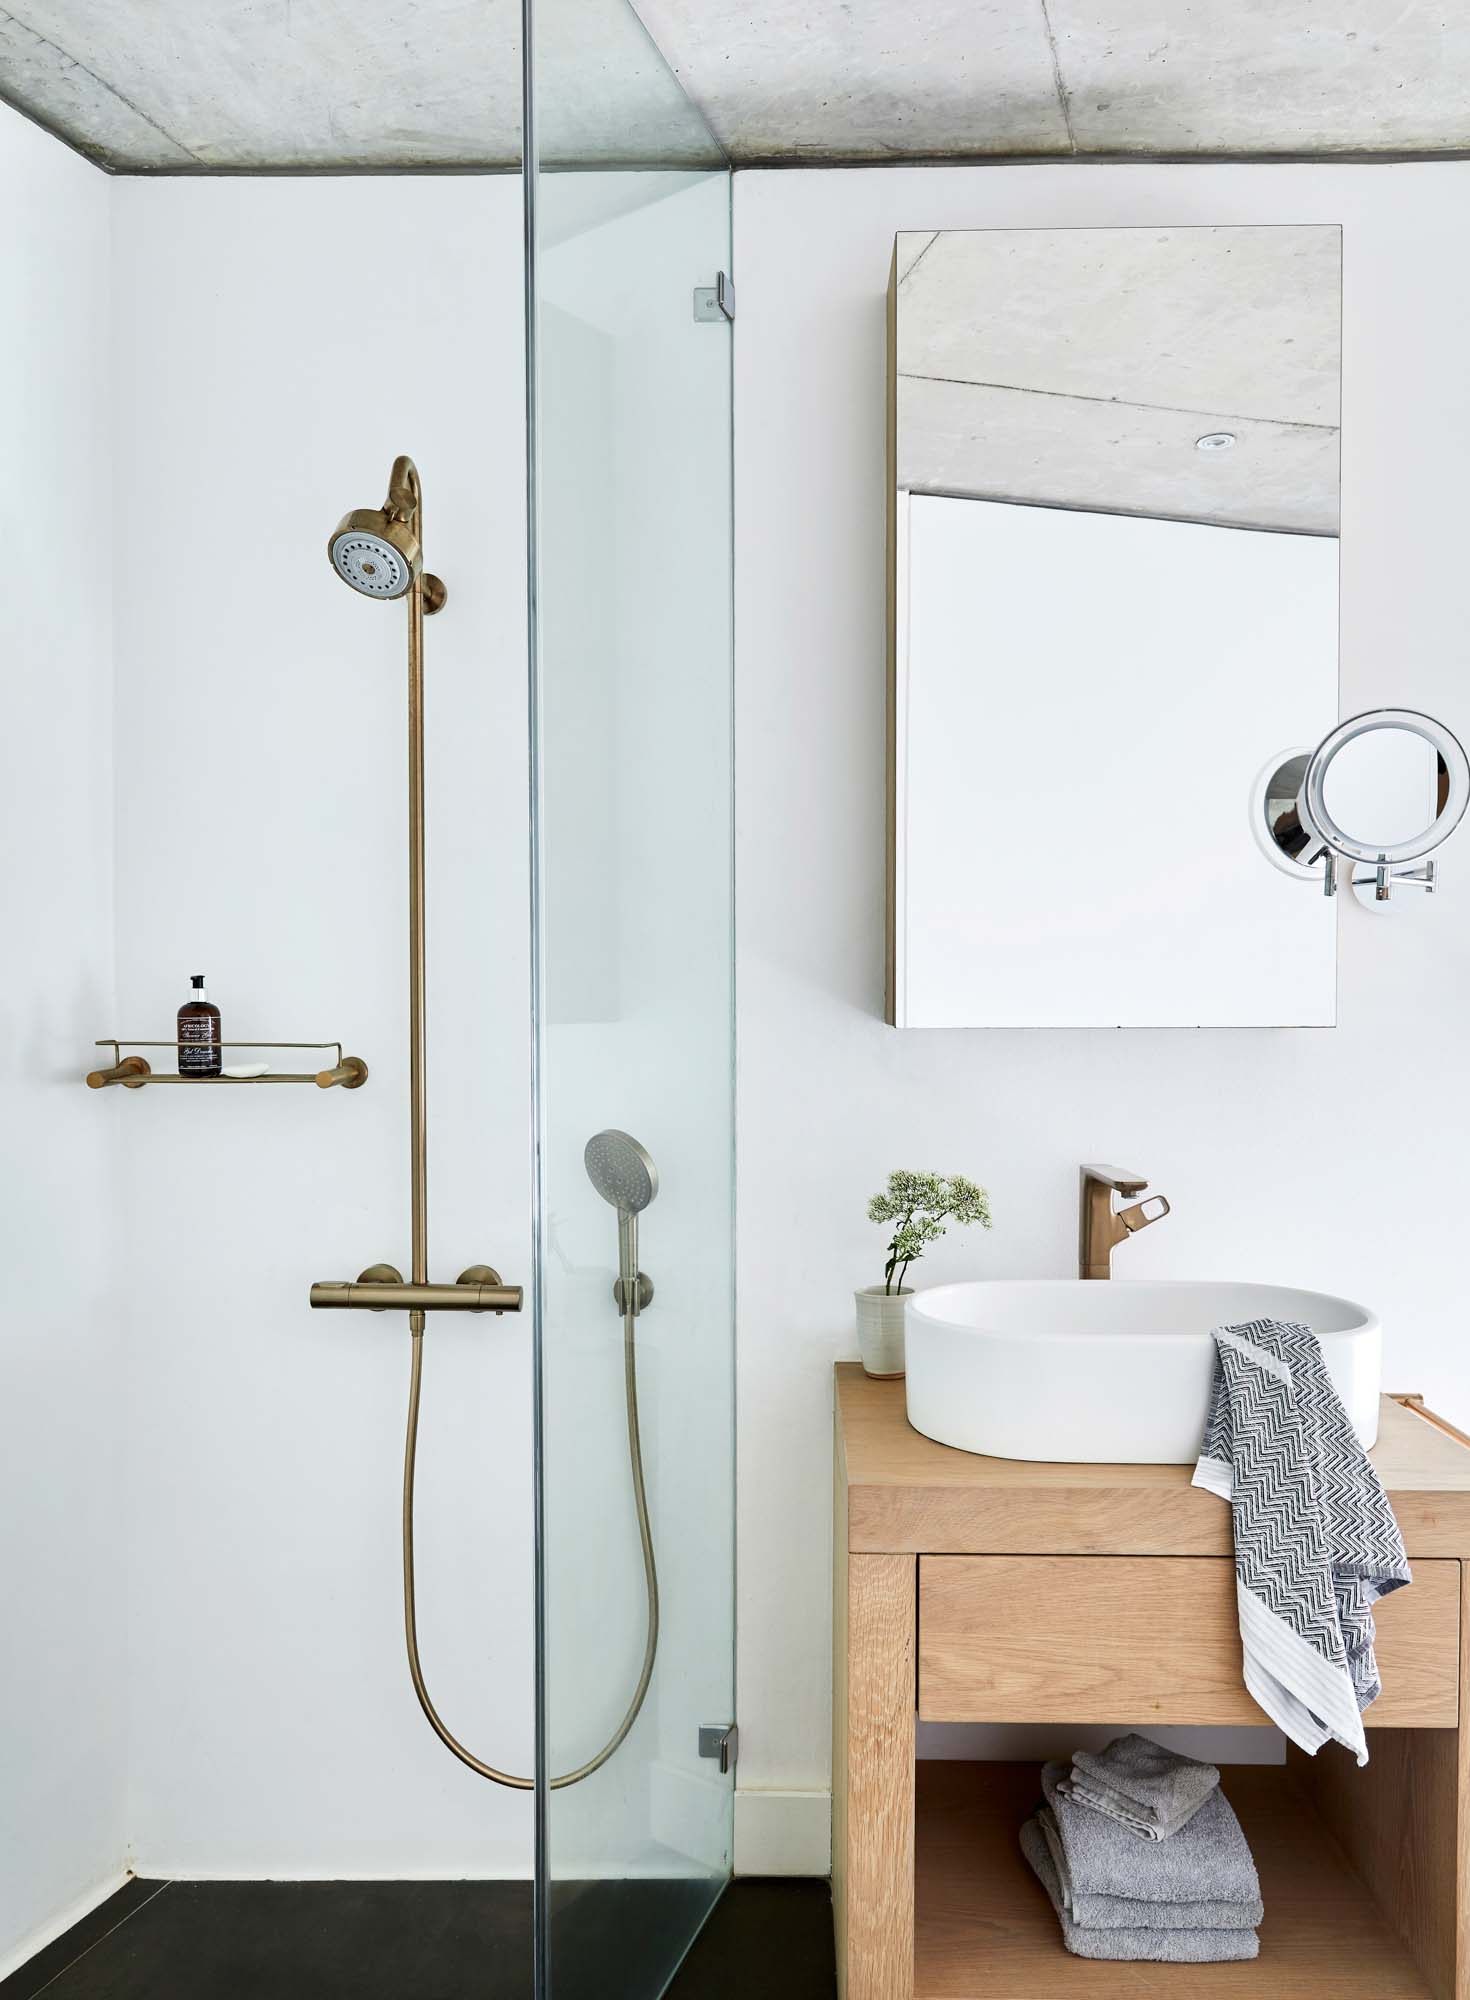 Bathroom with a shower to the left with a brass head and hose and glass shower screen. A timber vanity sits next to the shower with a single white sink